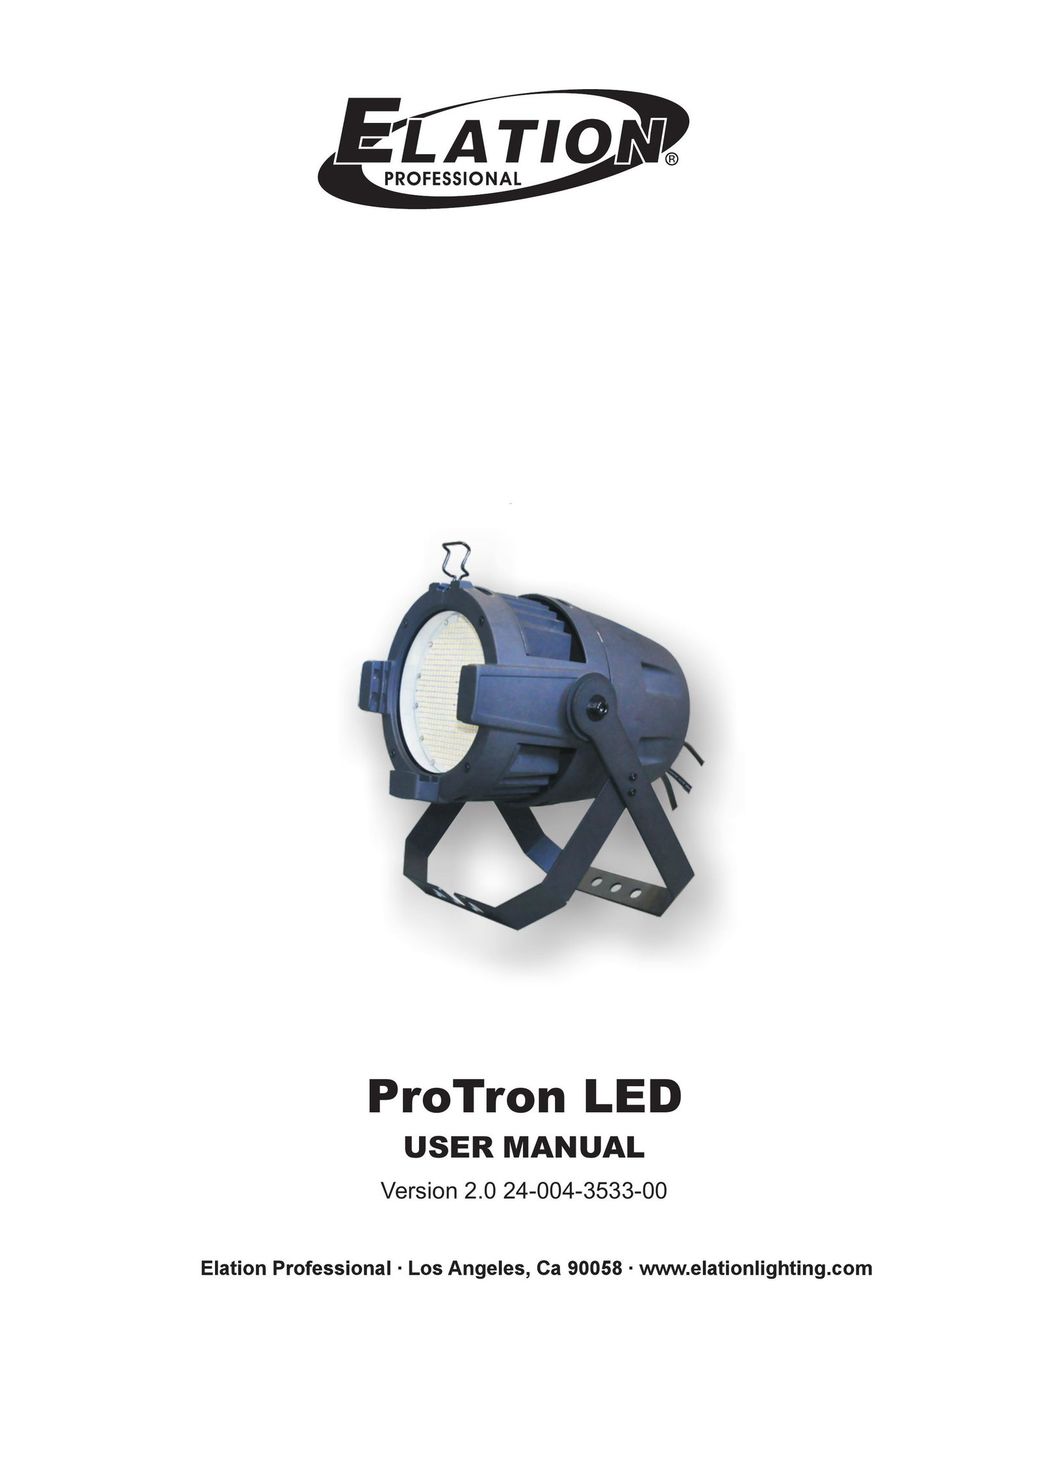 Elation Professional PROTRON LED Baby Accessories User Manual